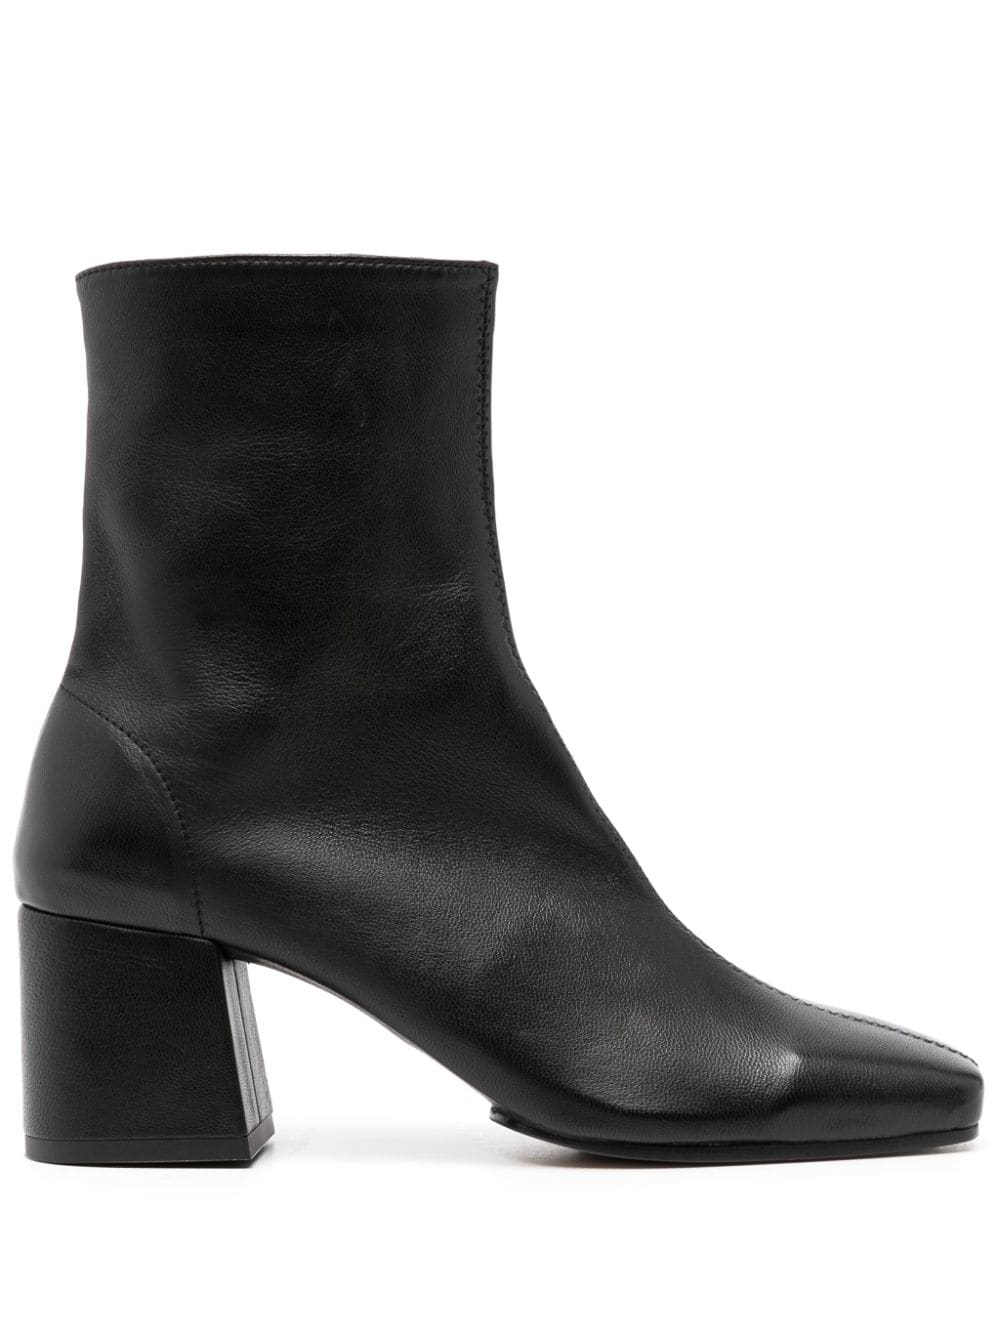 Souliers Martinez Chueca 90 Leather Heeled Boots In Black